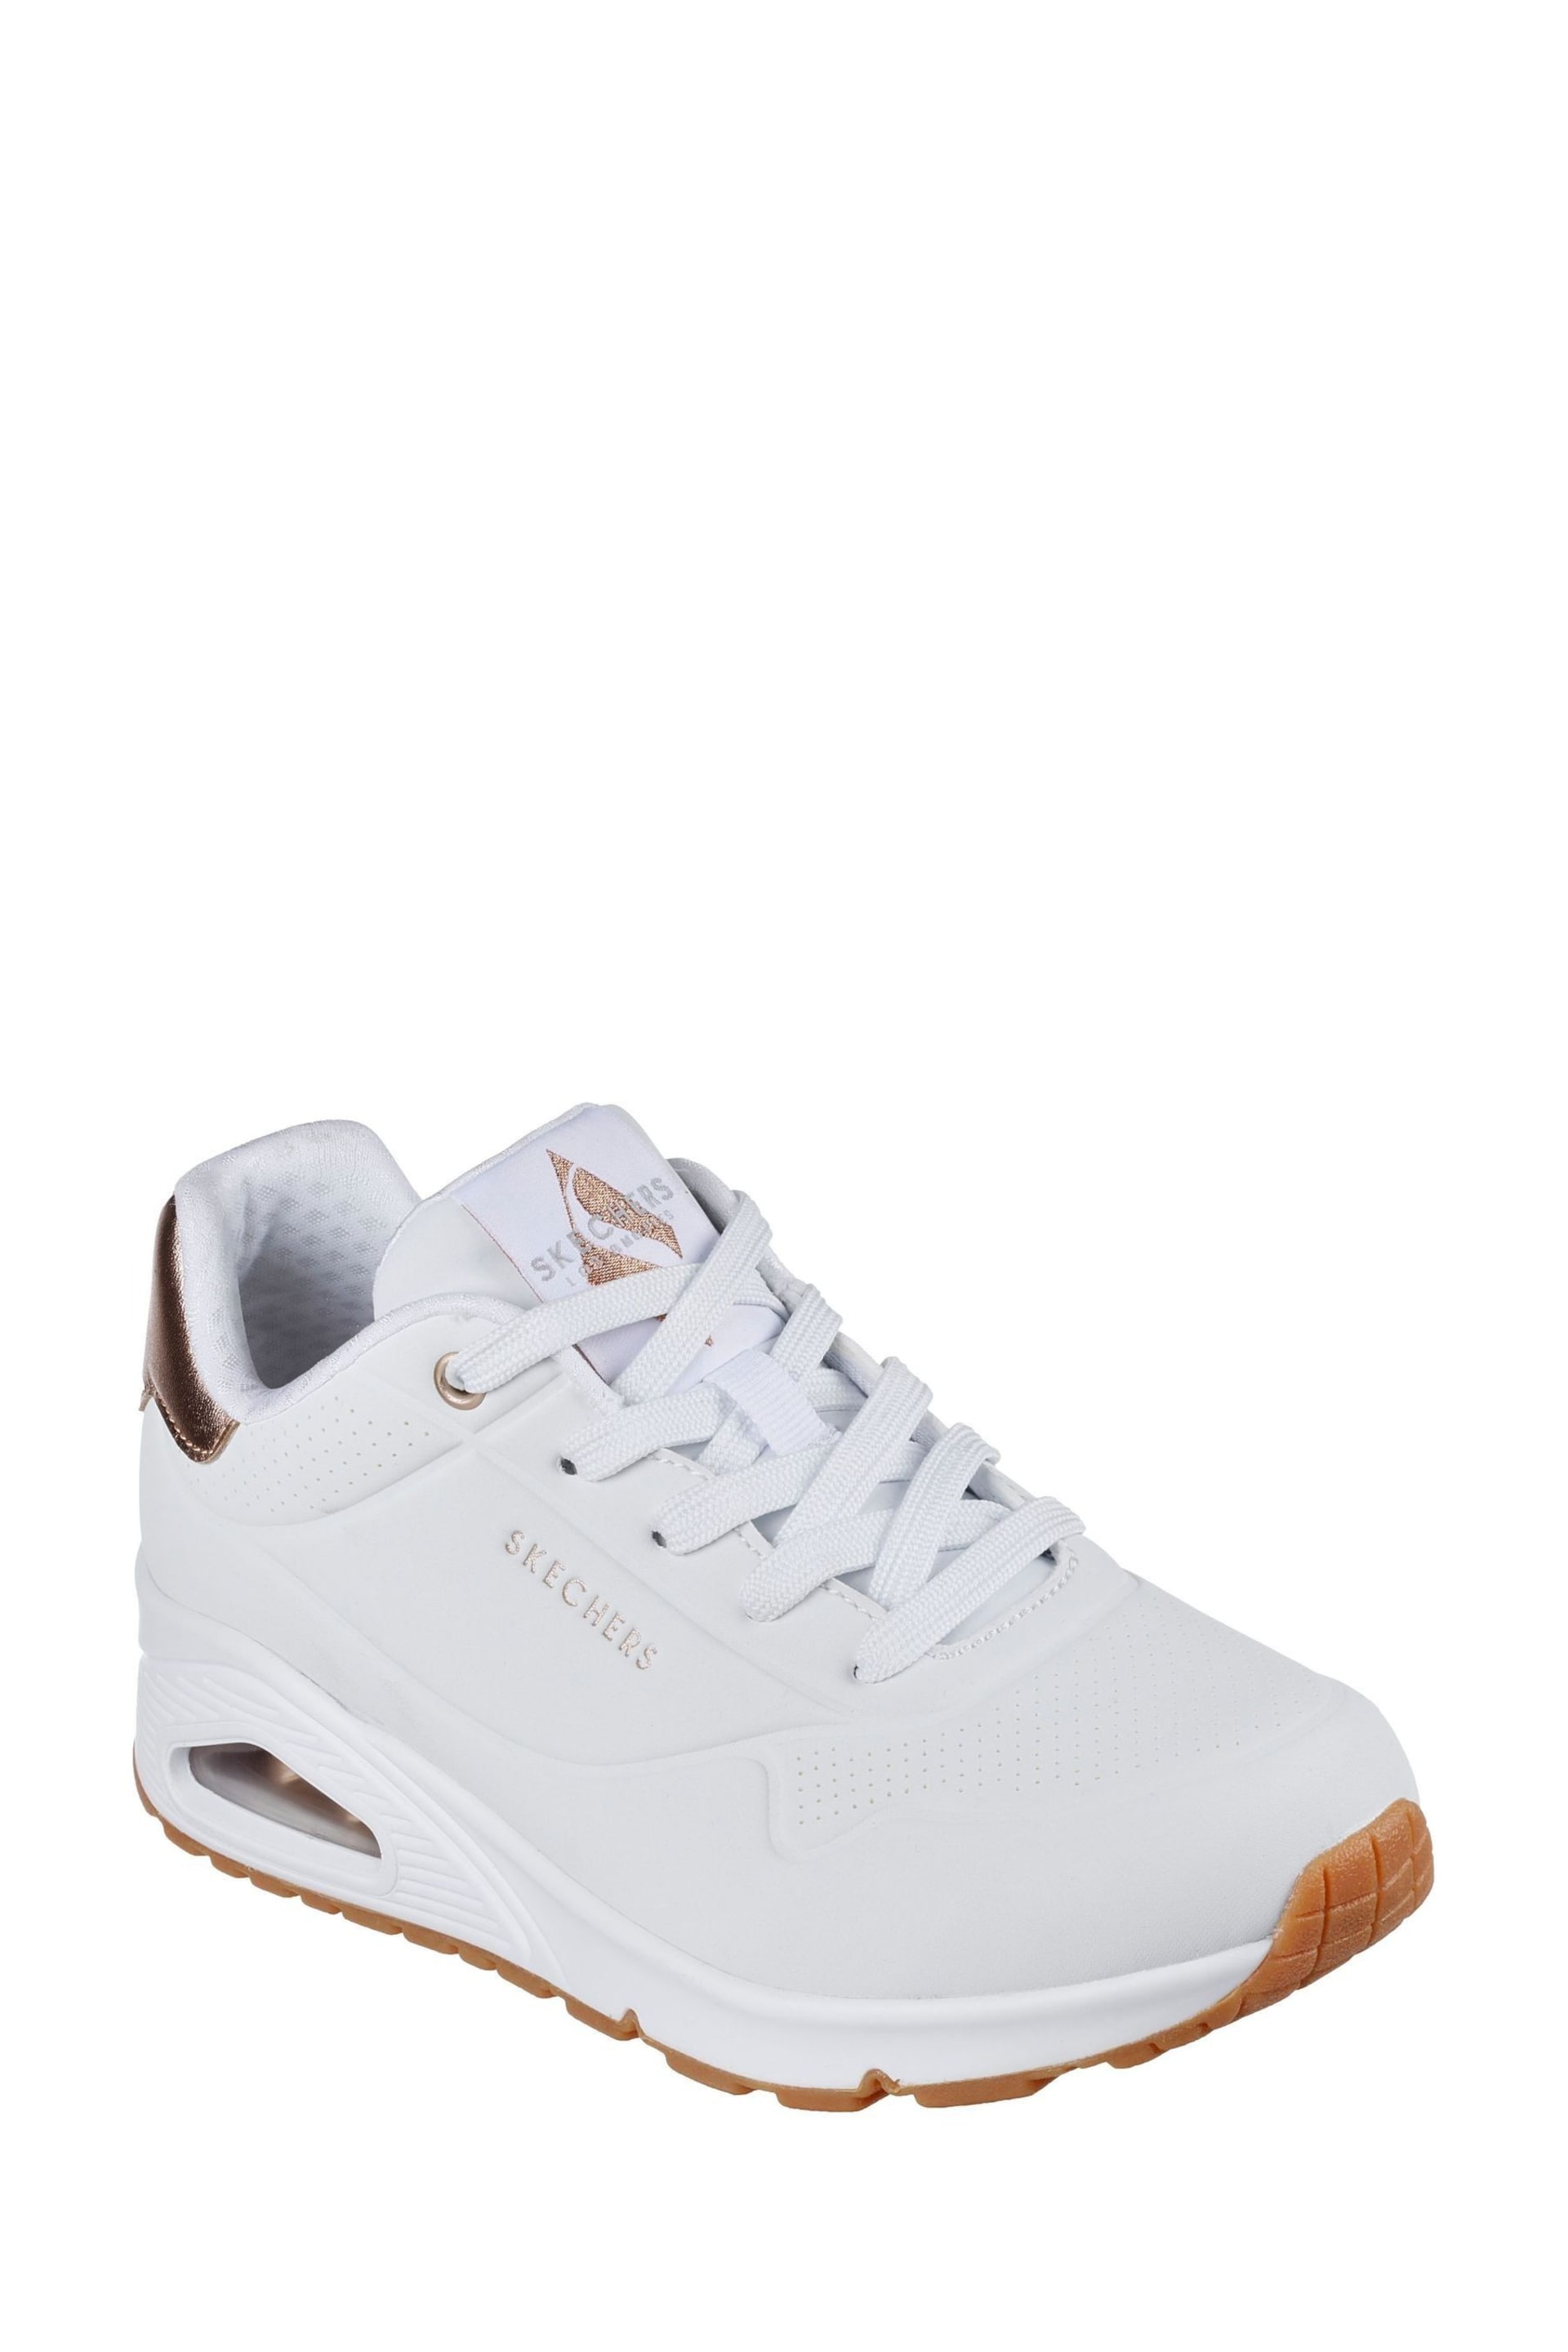 Skechers White Uno Lite Lighter One Trainers - Image 5 of 6